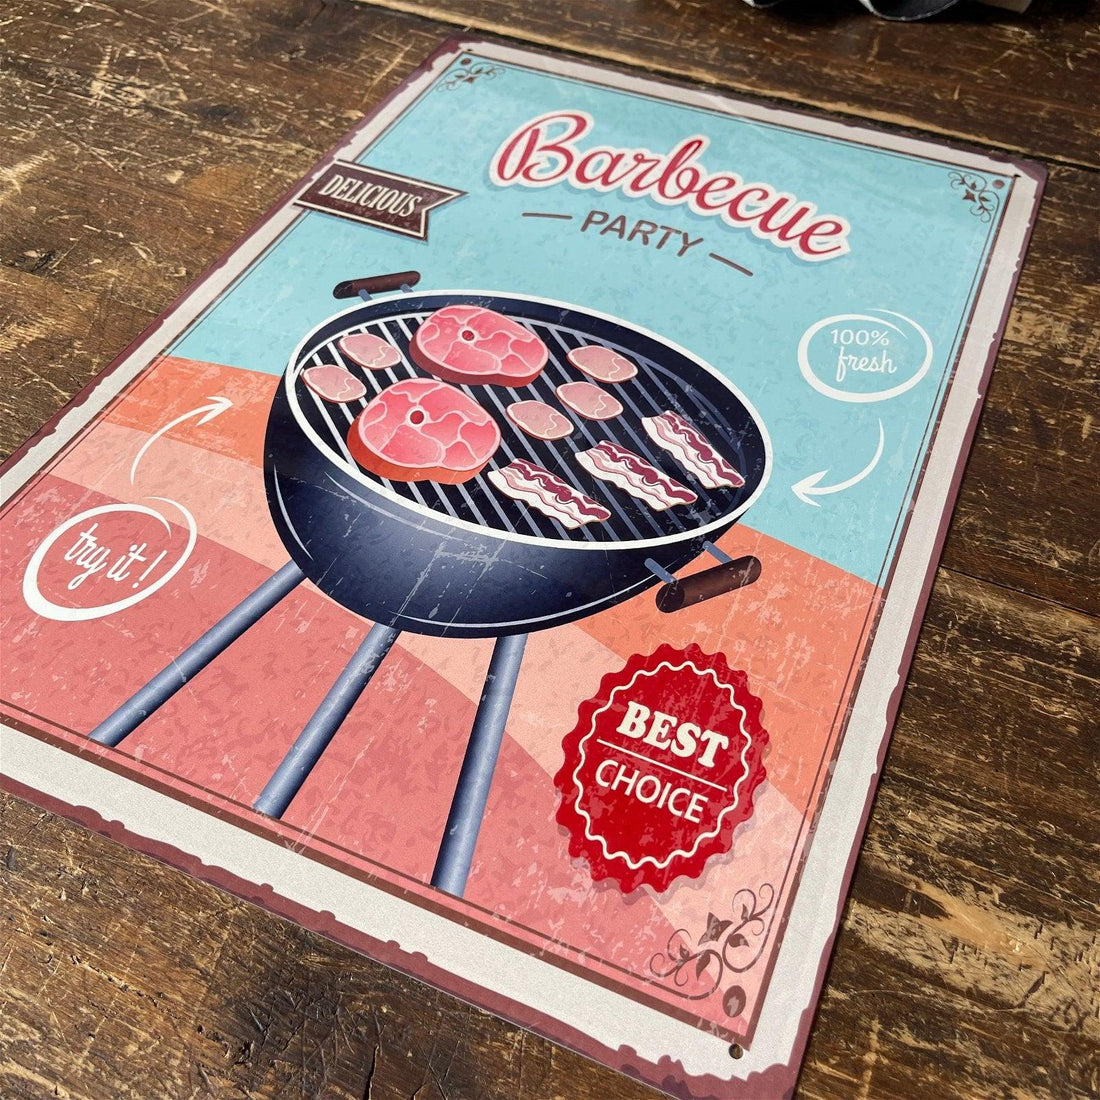 Vintage Metal Sign - Retro Barbecue Party Sign - £27.99 - Signs & Rules 